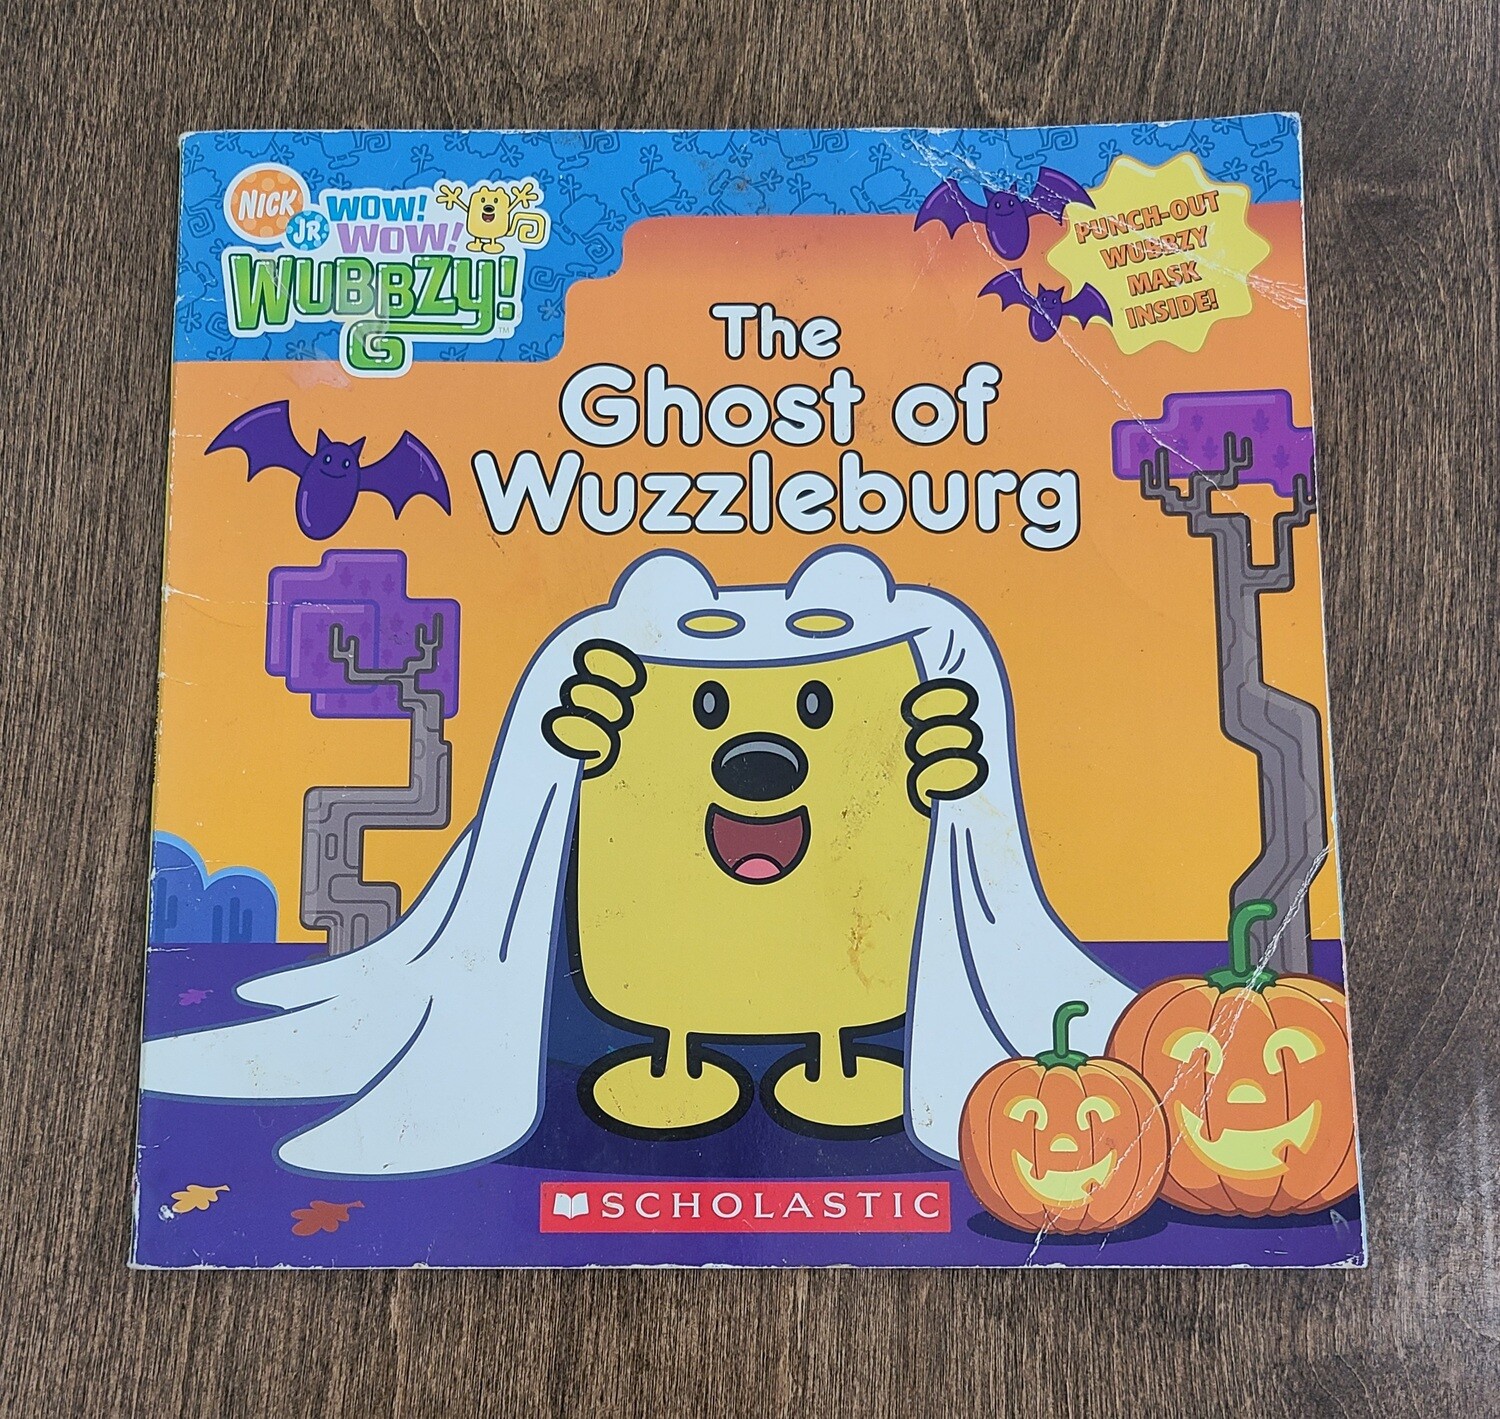 The Ghost of Wuzzleburg by Lauren Cecil